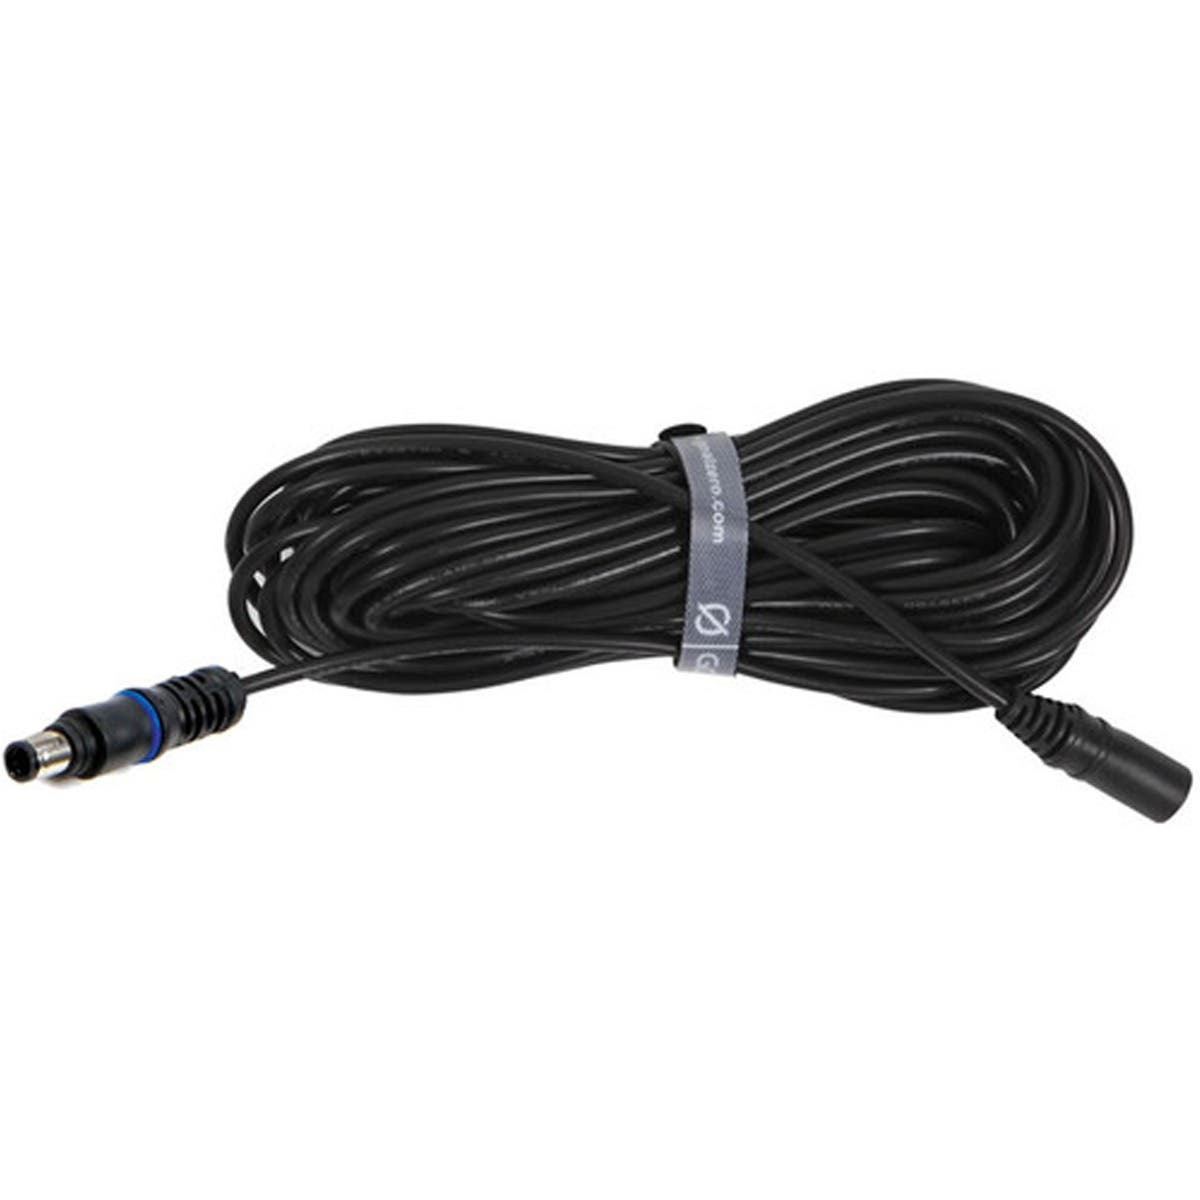 GOAL ZERO 8mm Input Extension Cable - 30ft